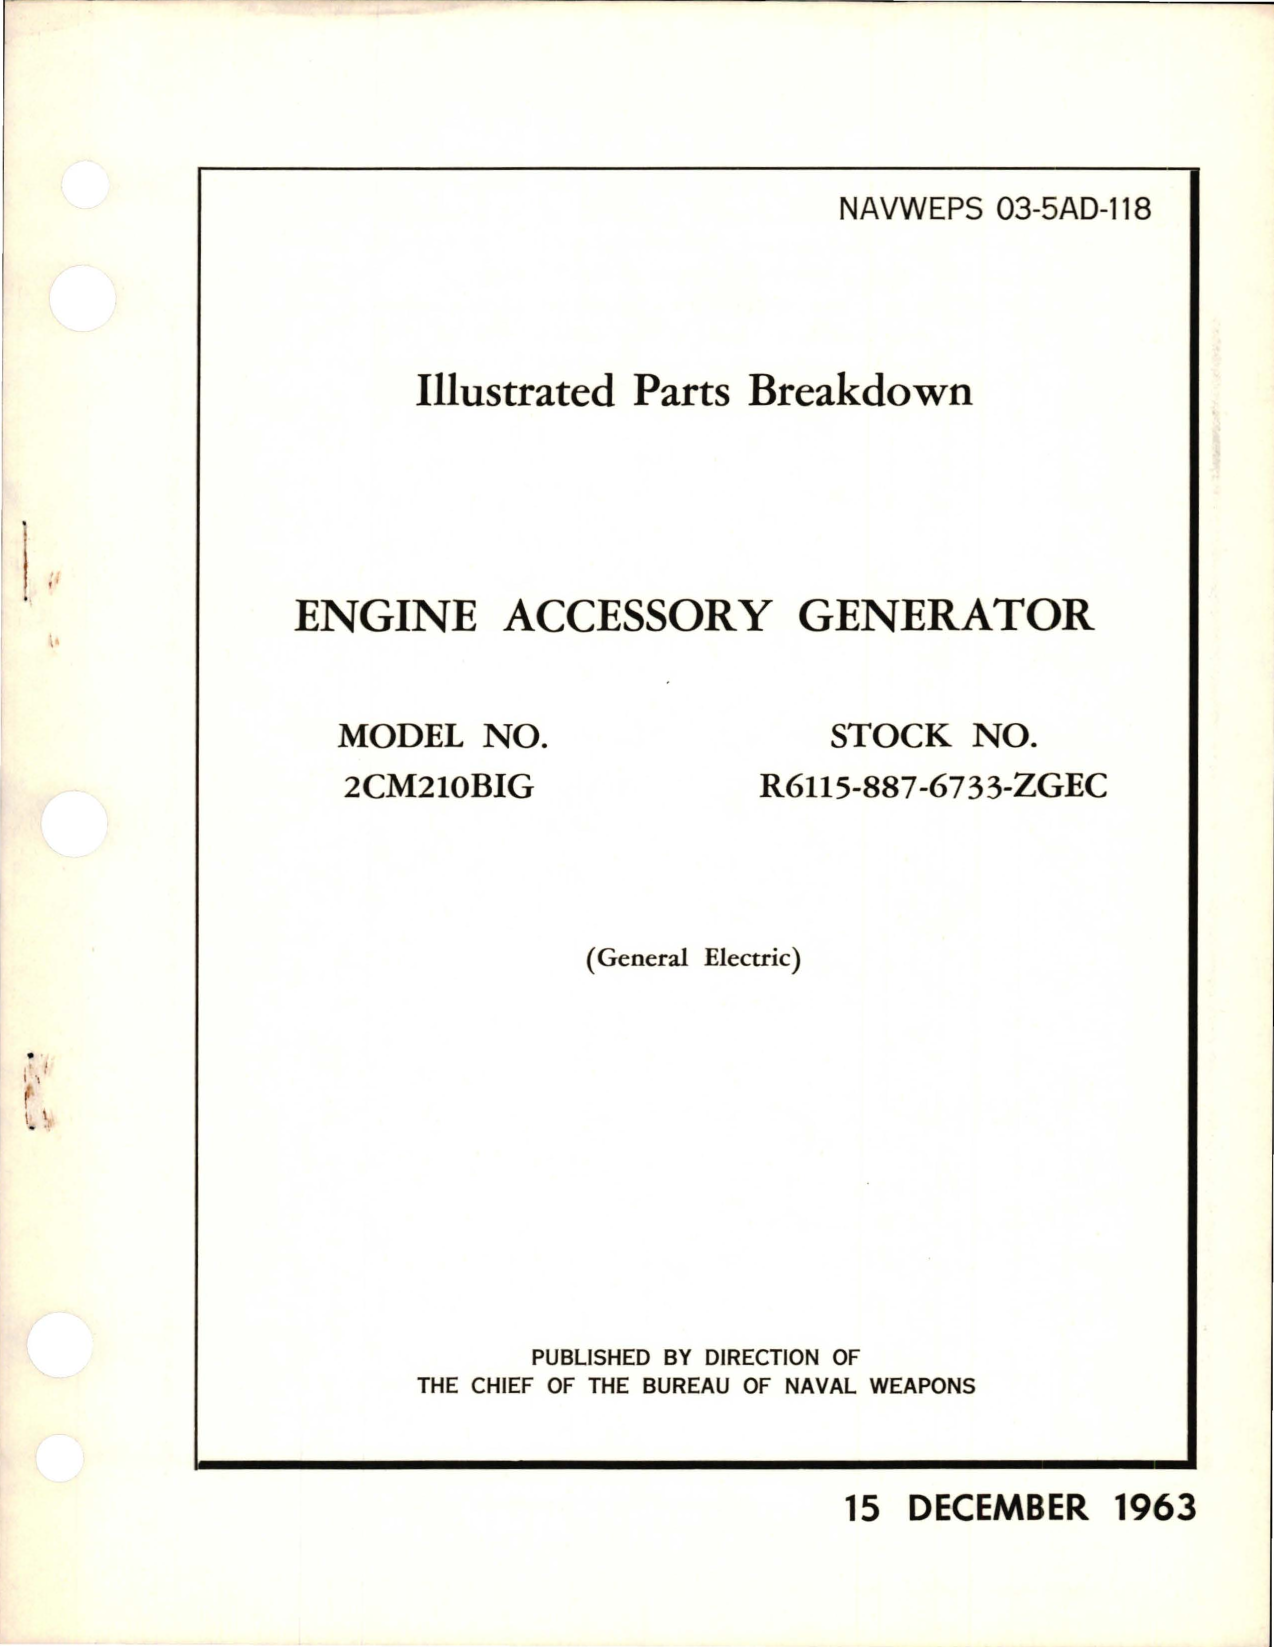 Sample page 1 from AirCorps Library document: Illustrated Parts Breakdown for Engine Accessory Generator - Model 2CM210BIG